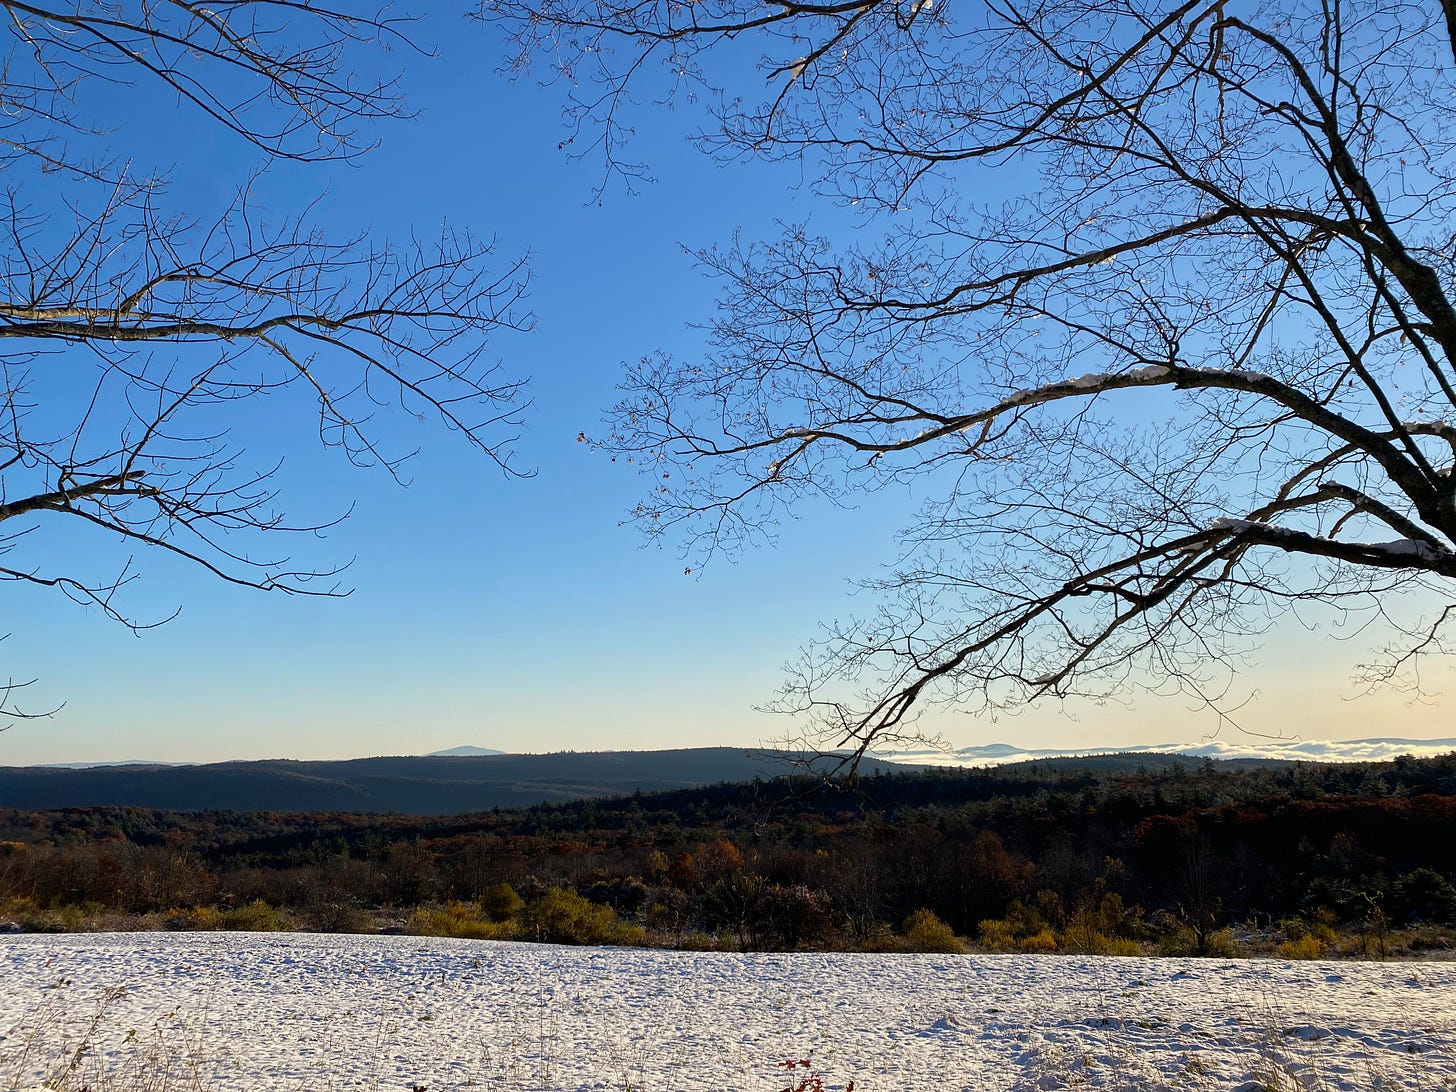 A sunlit, snow-covered field in front of a horizon of distant mountains and wisps of clouds. Several bare branches frame the image. 